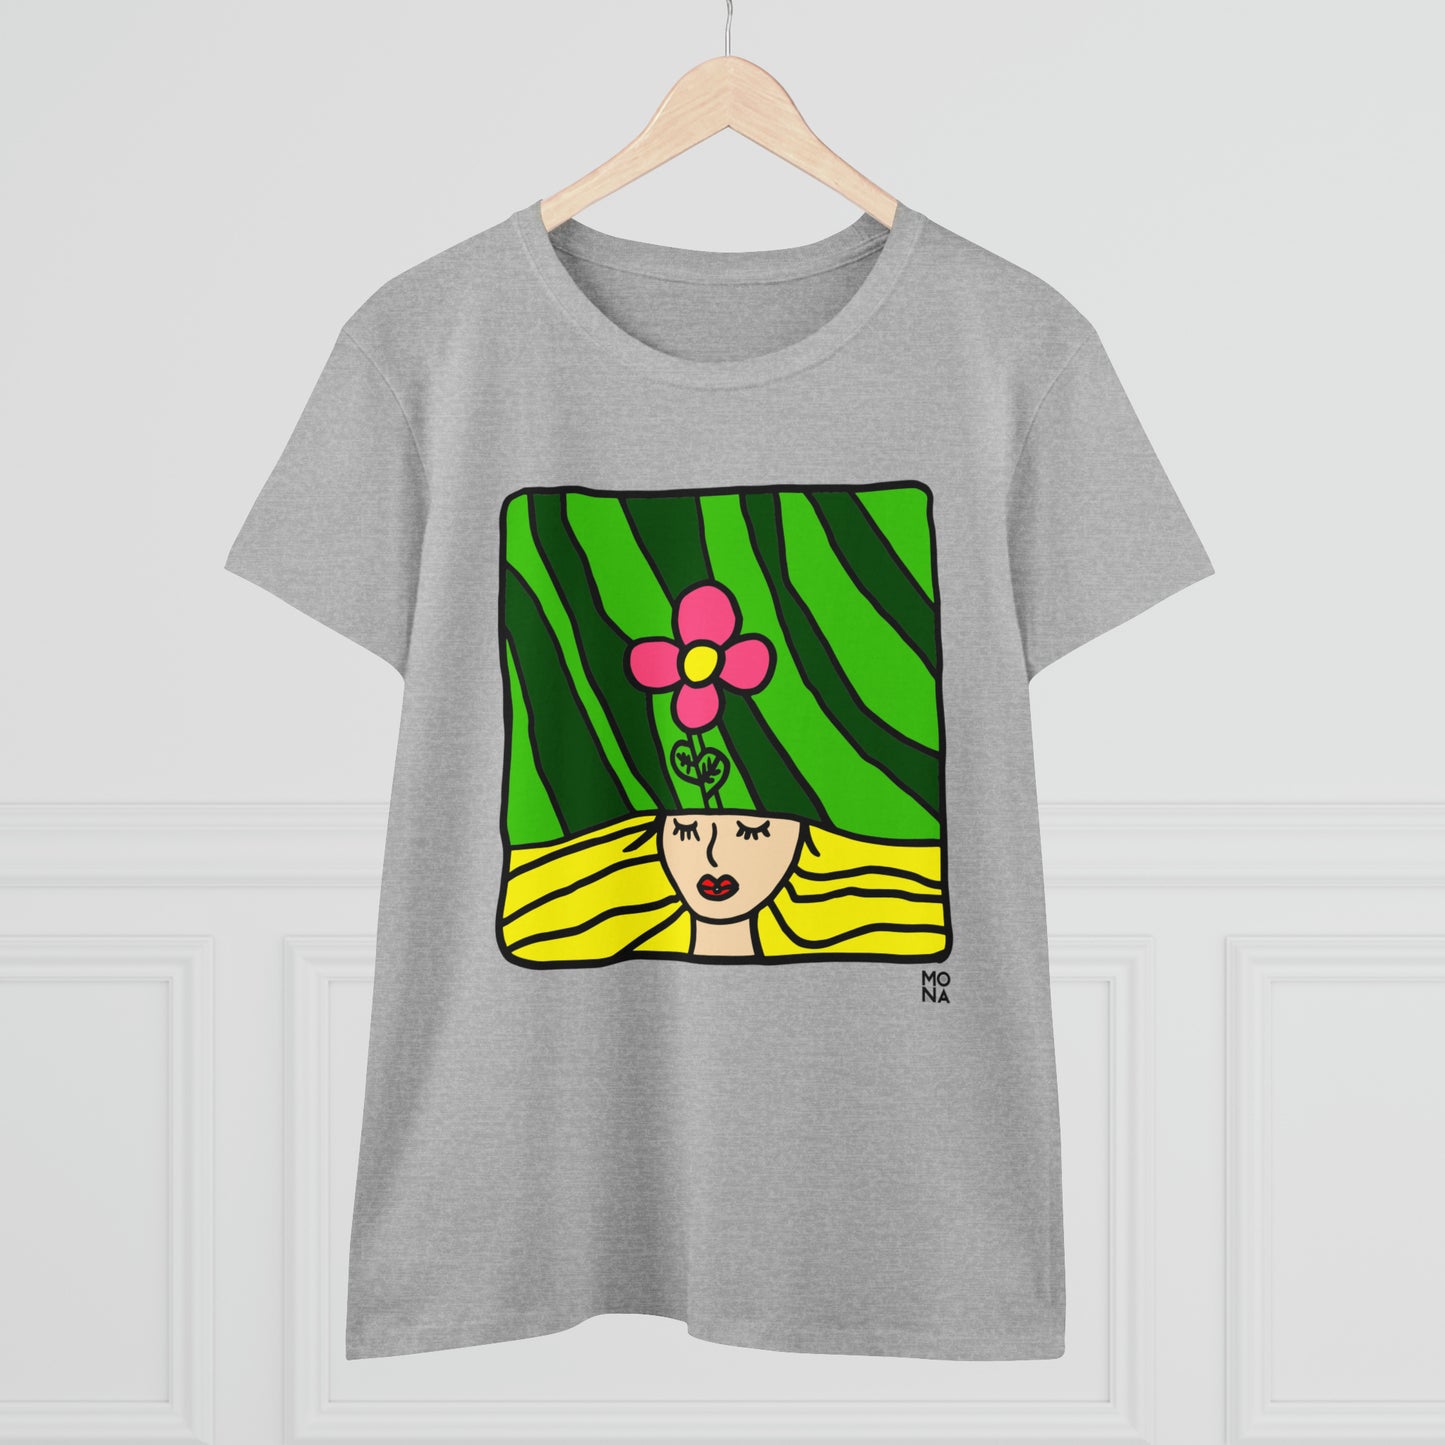 Blooming Reflections: The Mindful Florals Tshirt / Women's Midweight Cotton Tee